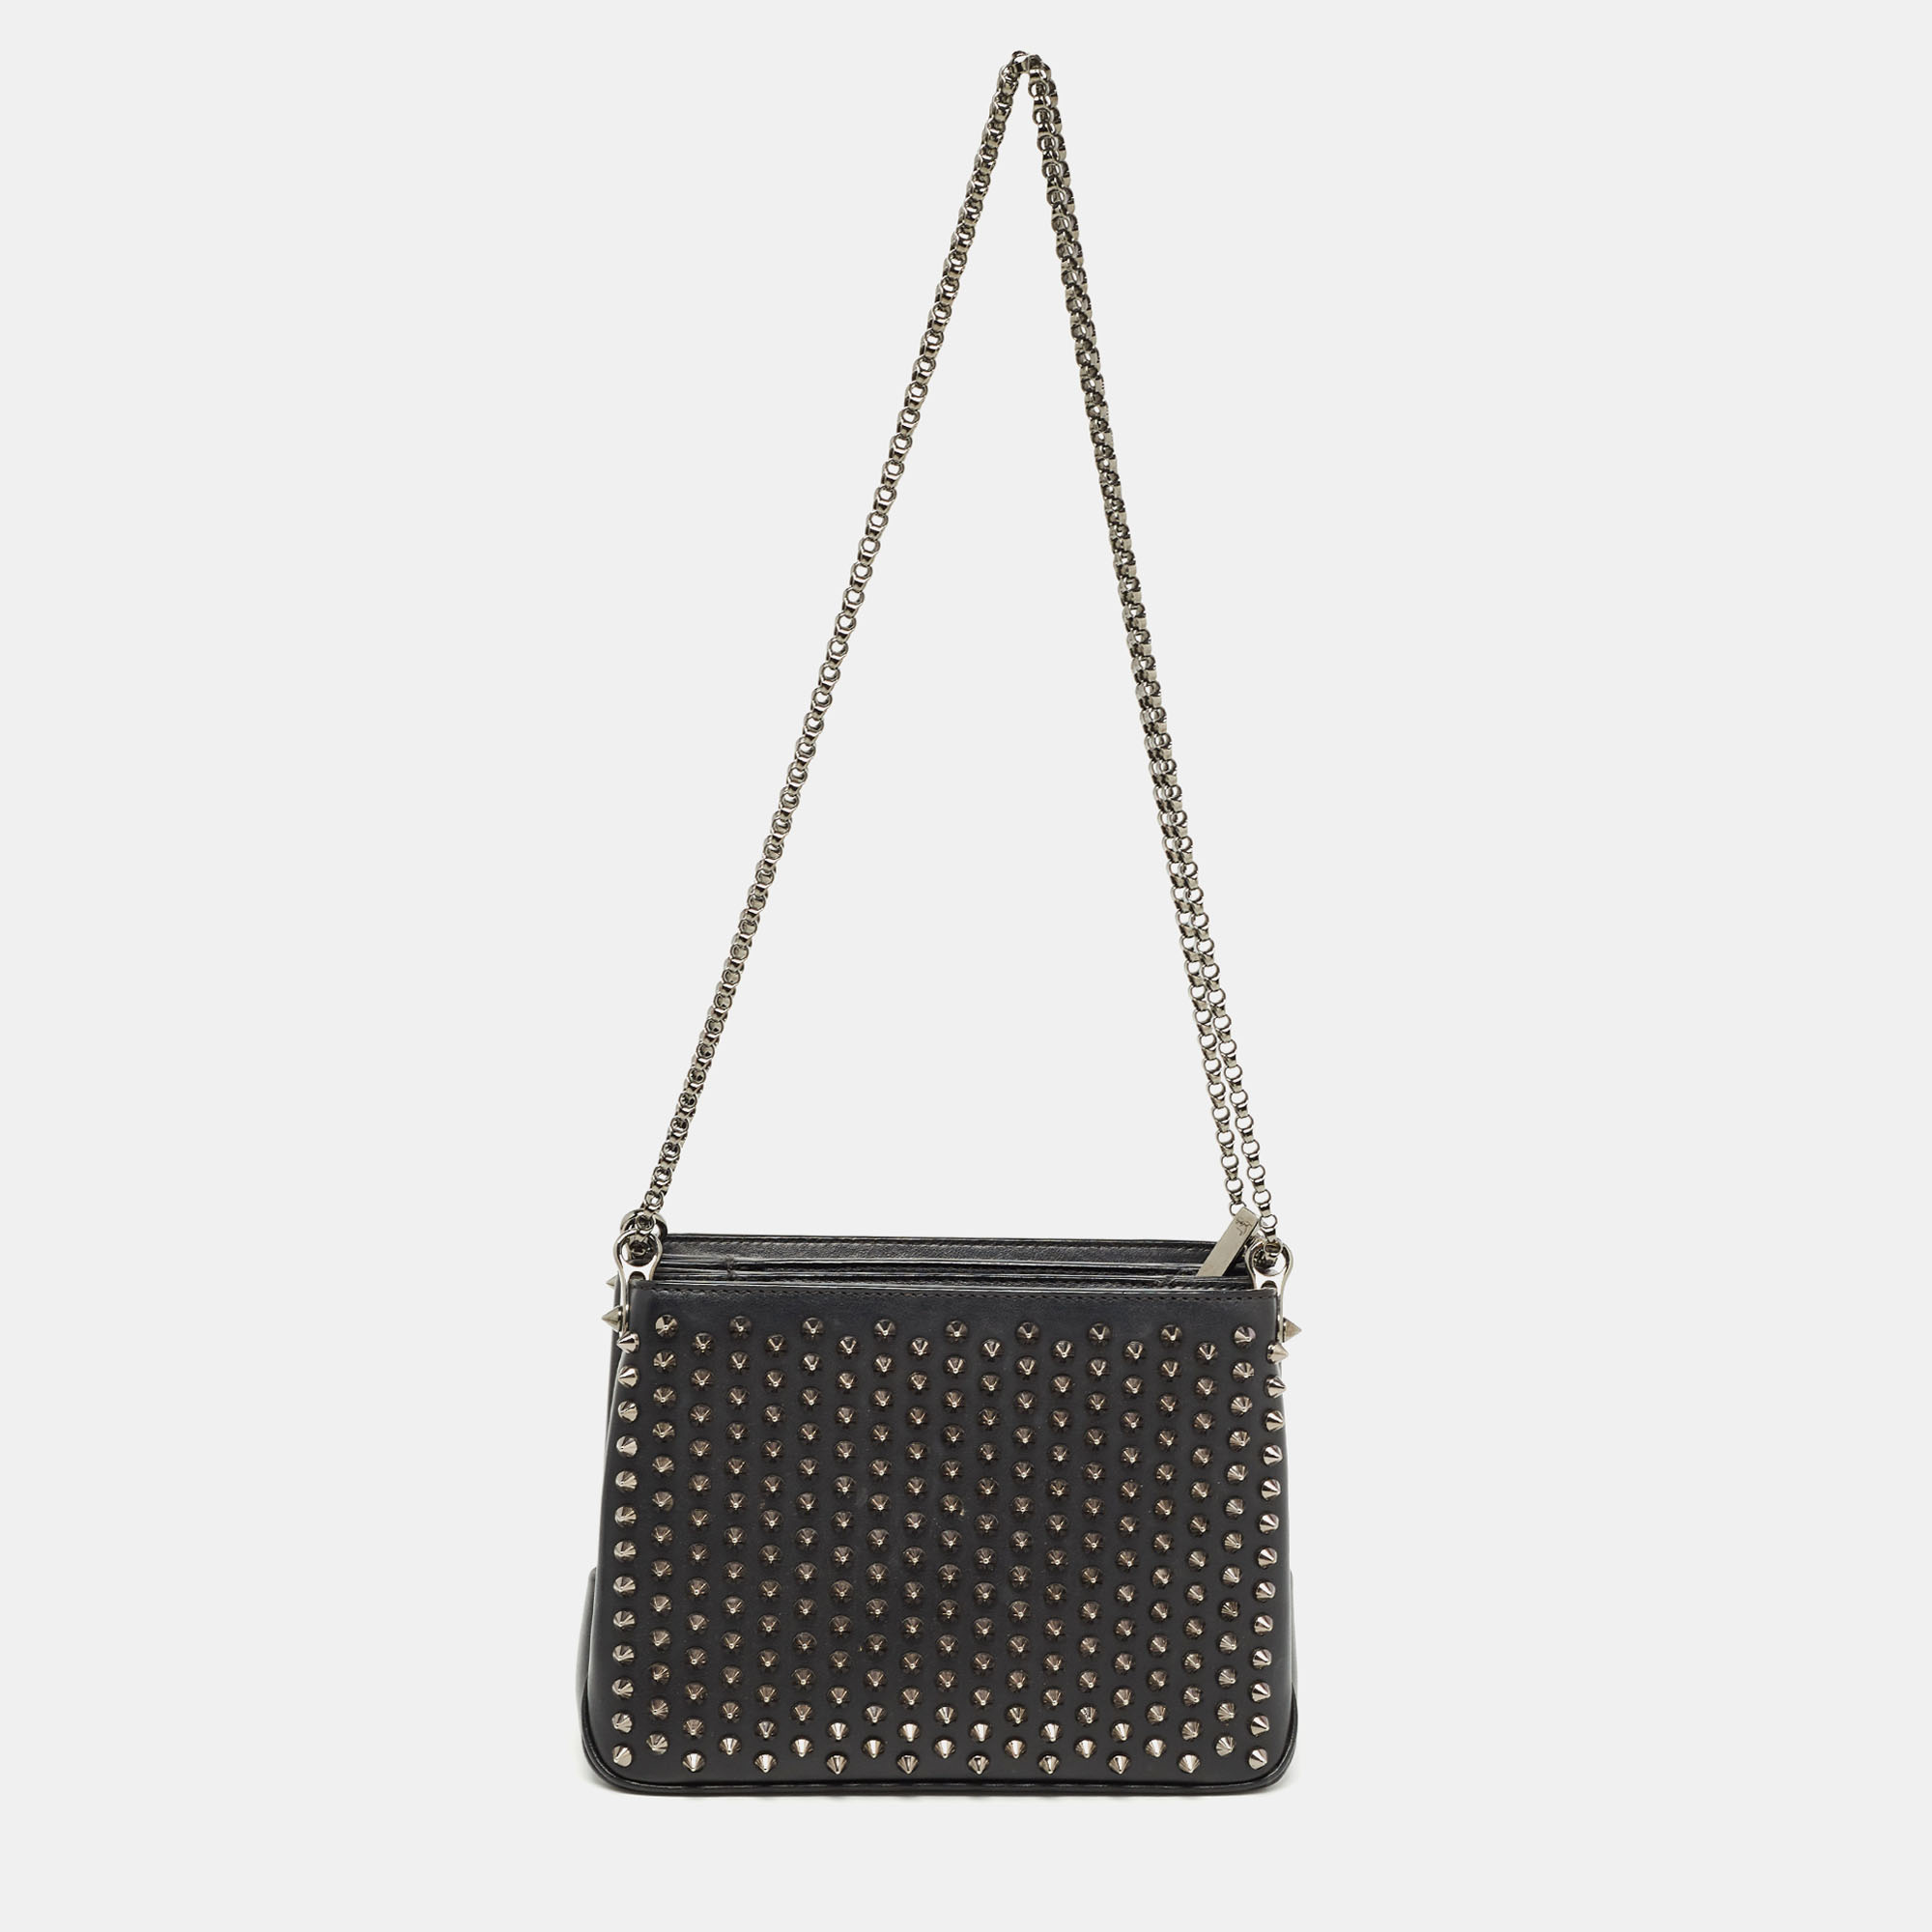 This stylish and elegant bag from Christian Louboutin will be your new favorite accessory Crafted from black leather the Triloubi bag comes with metal spikes on the front and shoulder chains for an easy carrying experience.